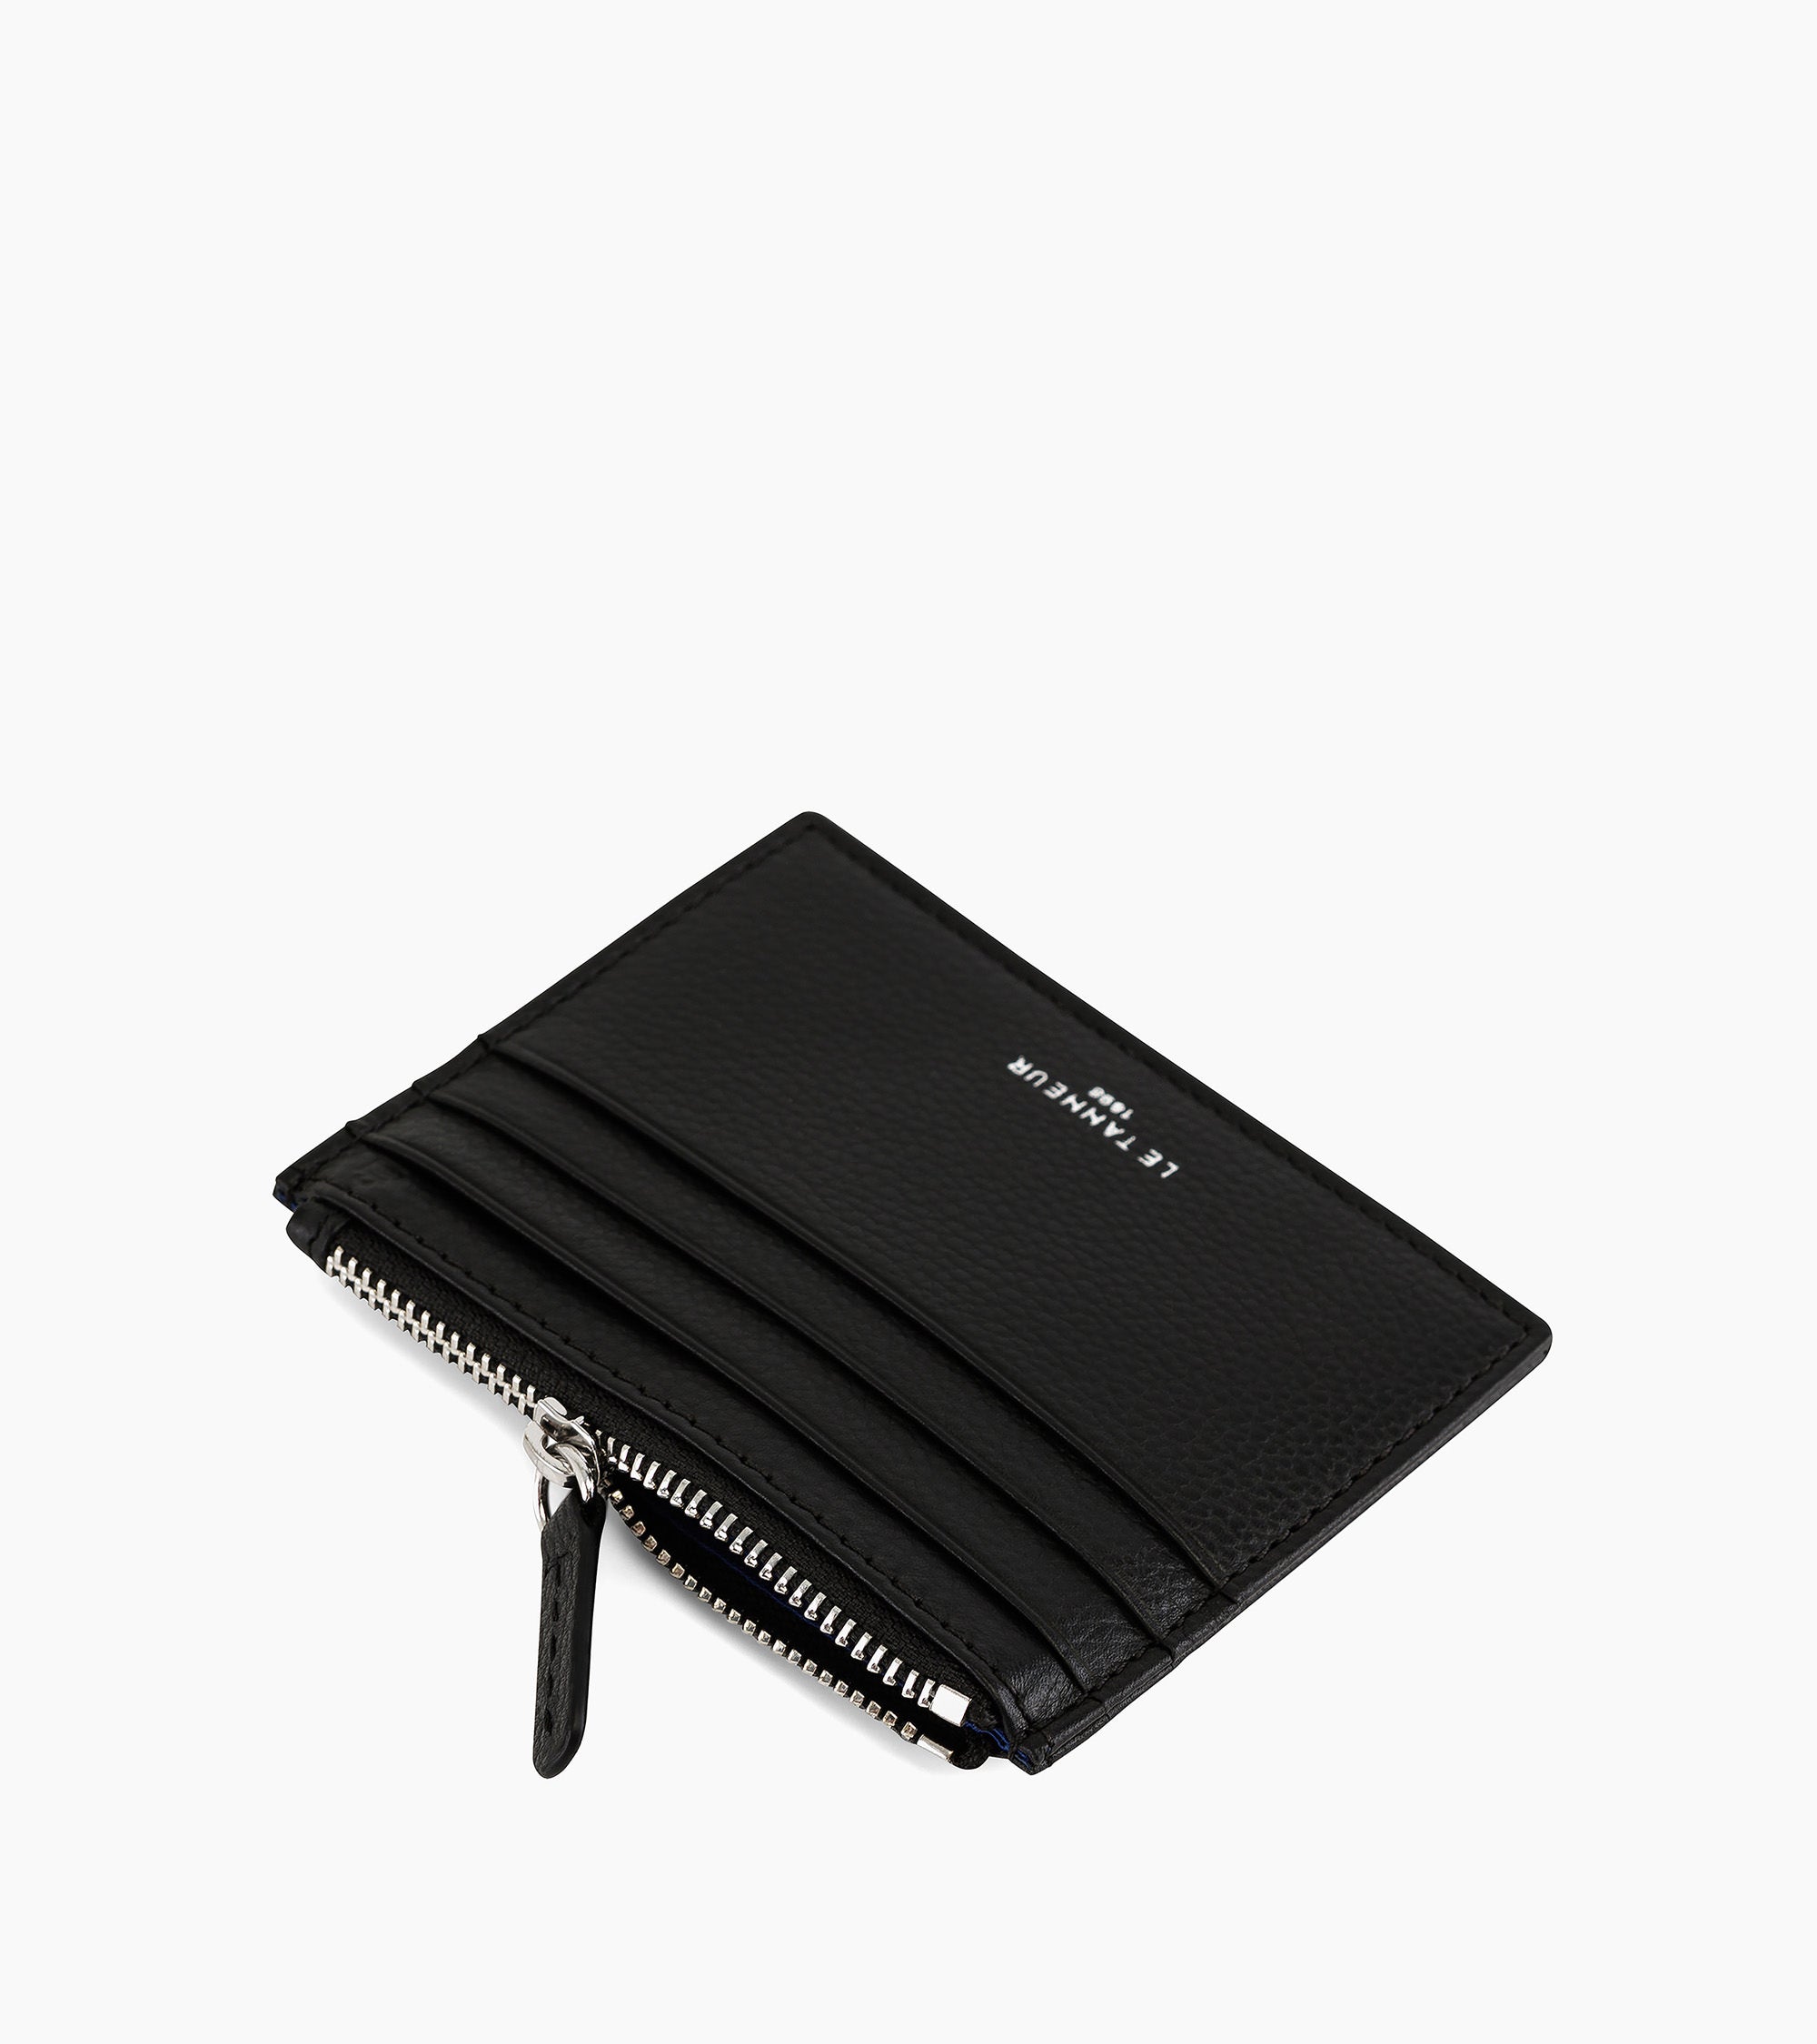 Zipped Charles pebbled leather cardholder